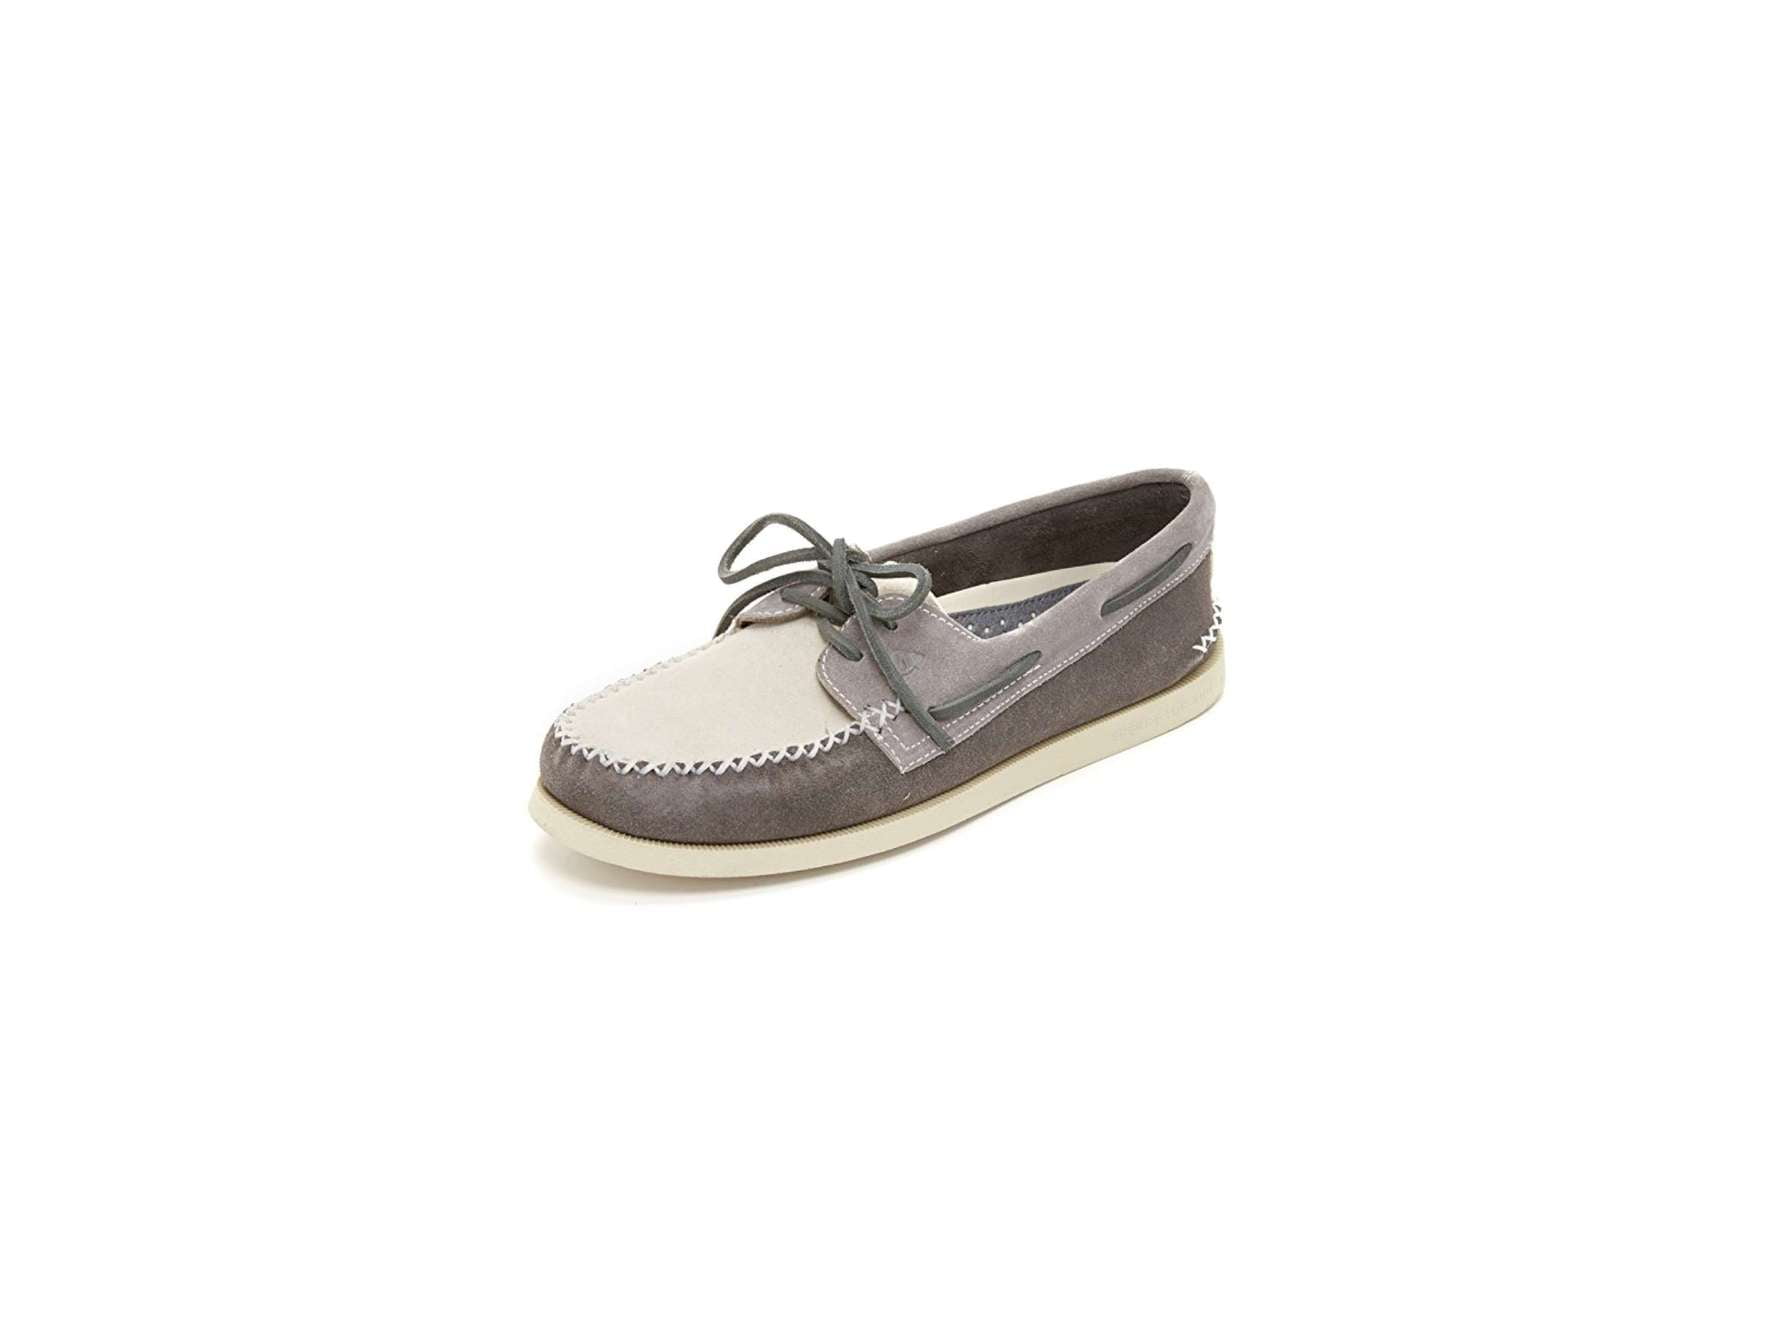 sperry espadrille wedges closed toe